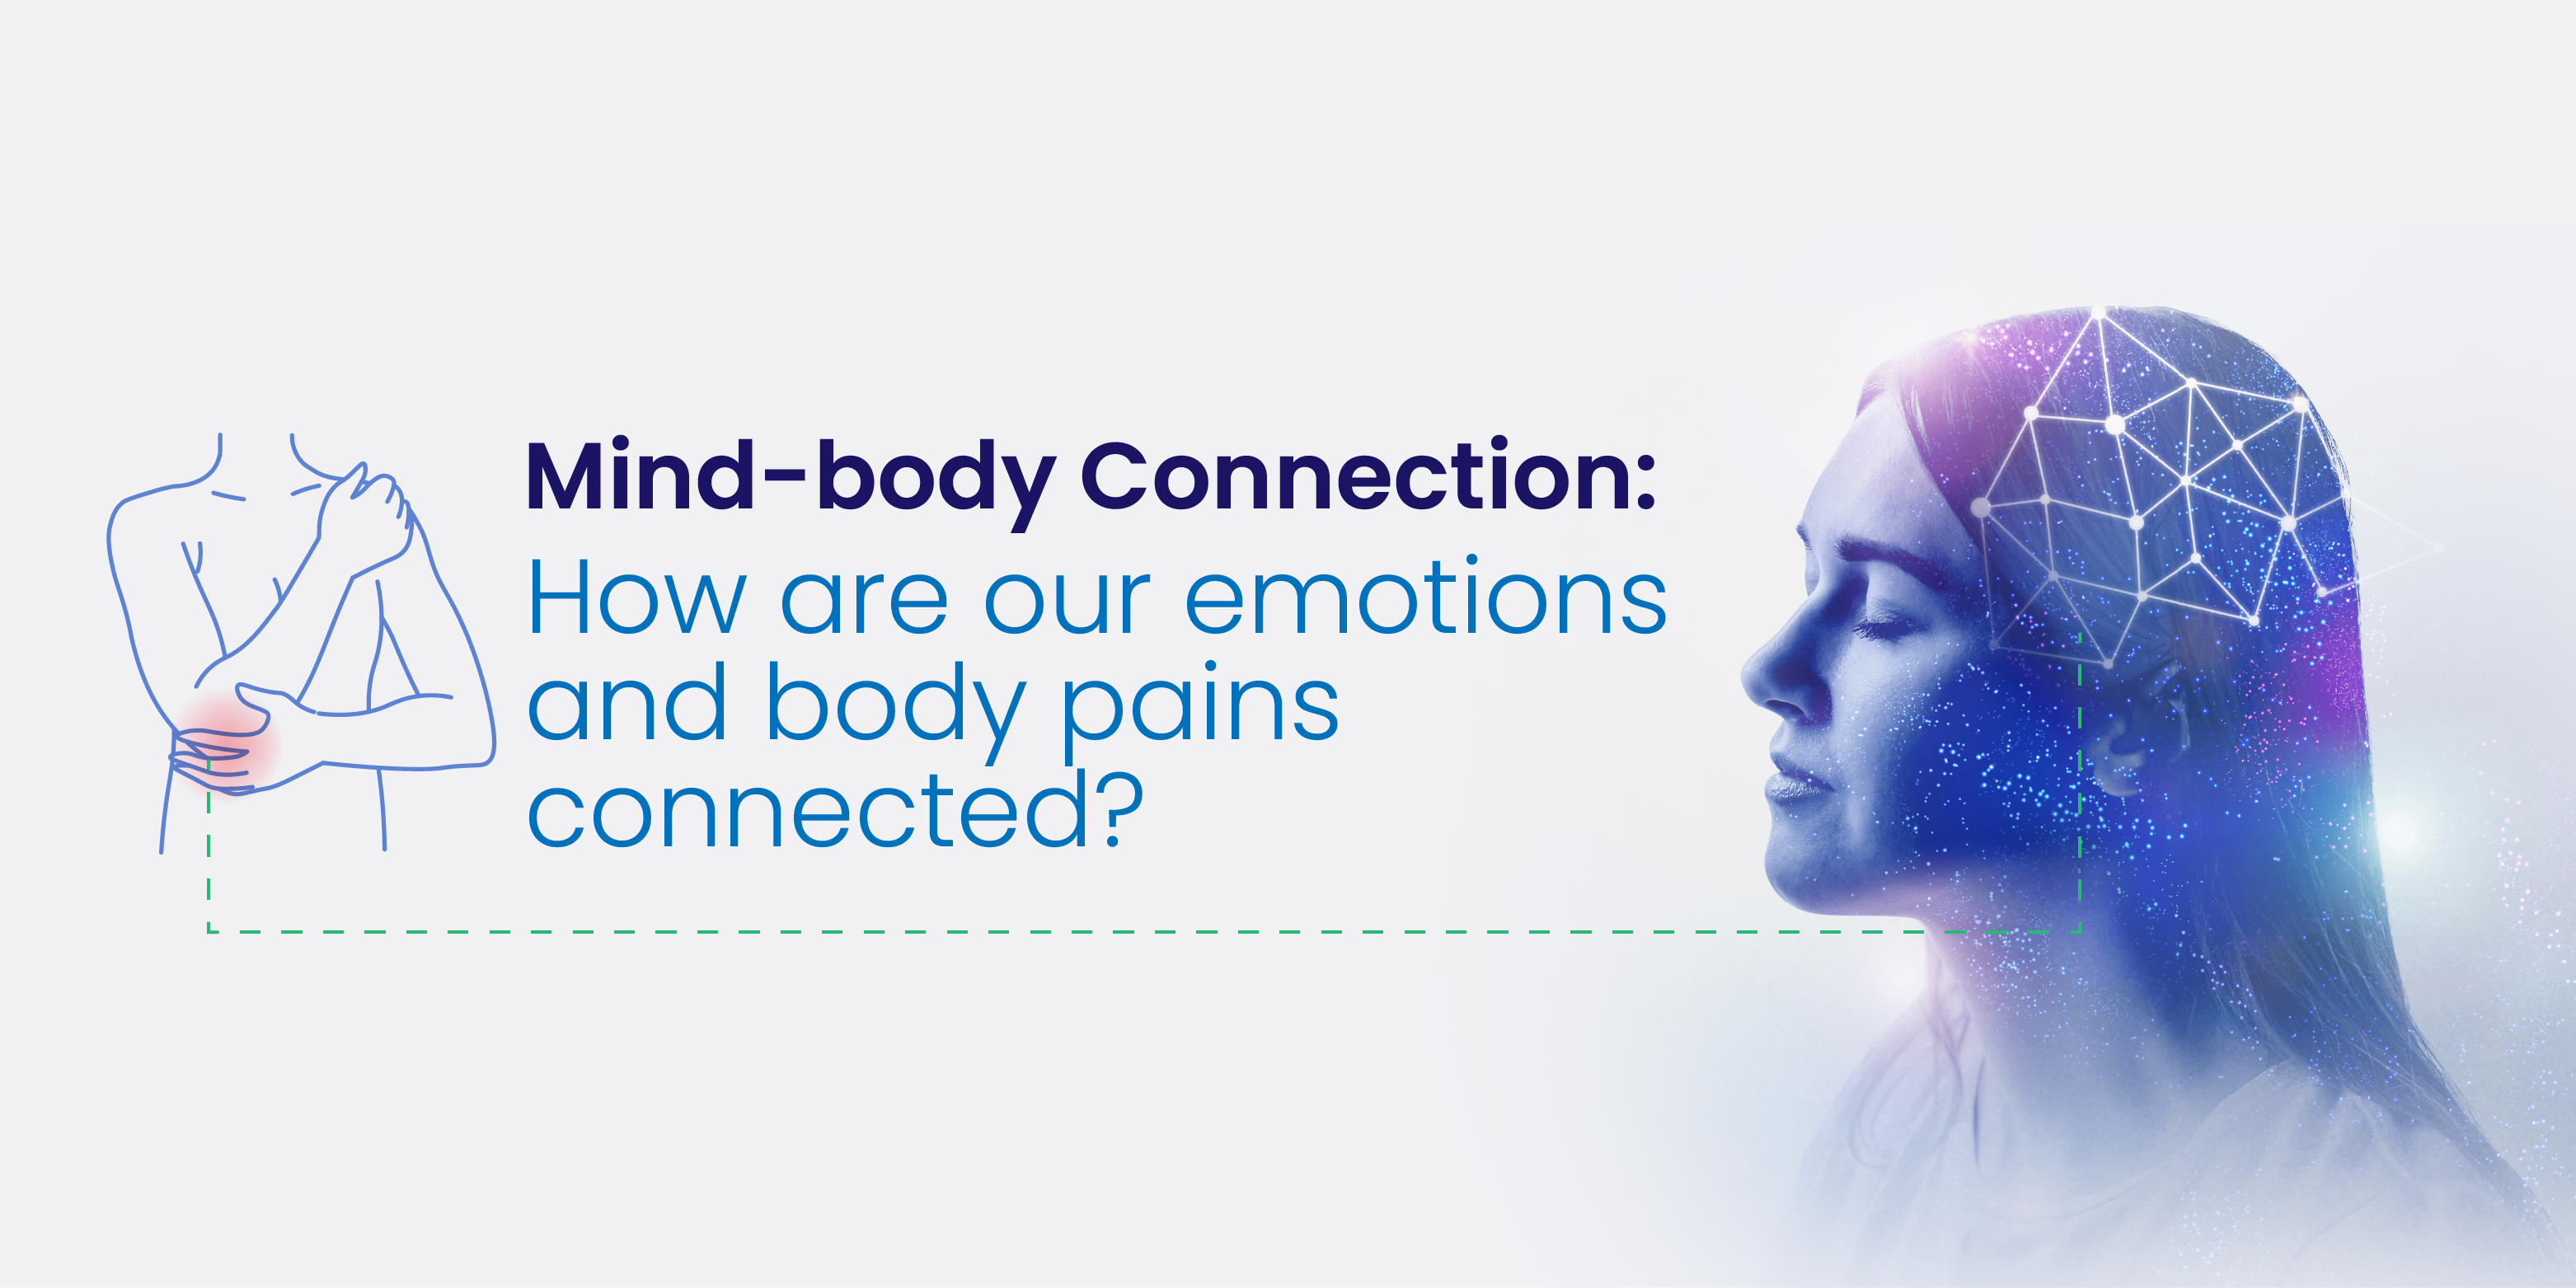 Mind-body Connection: How are our emotions and body pains connected?